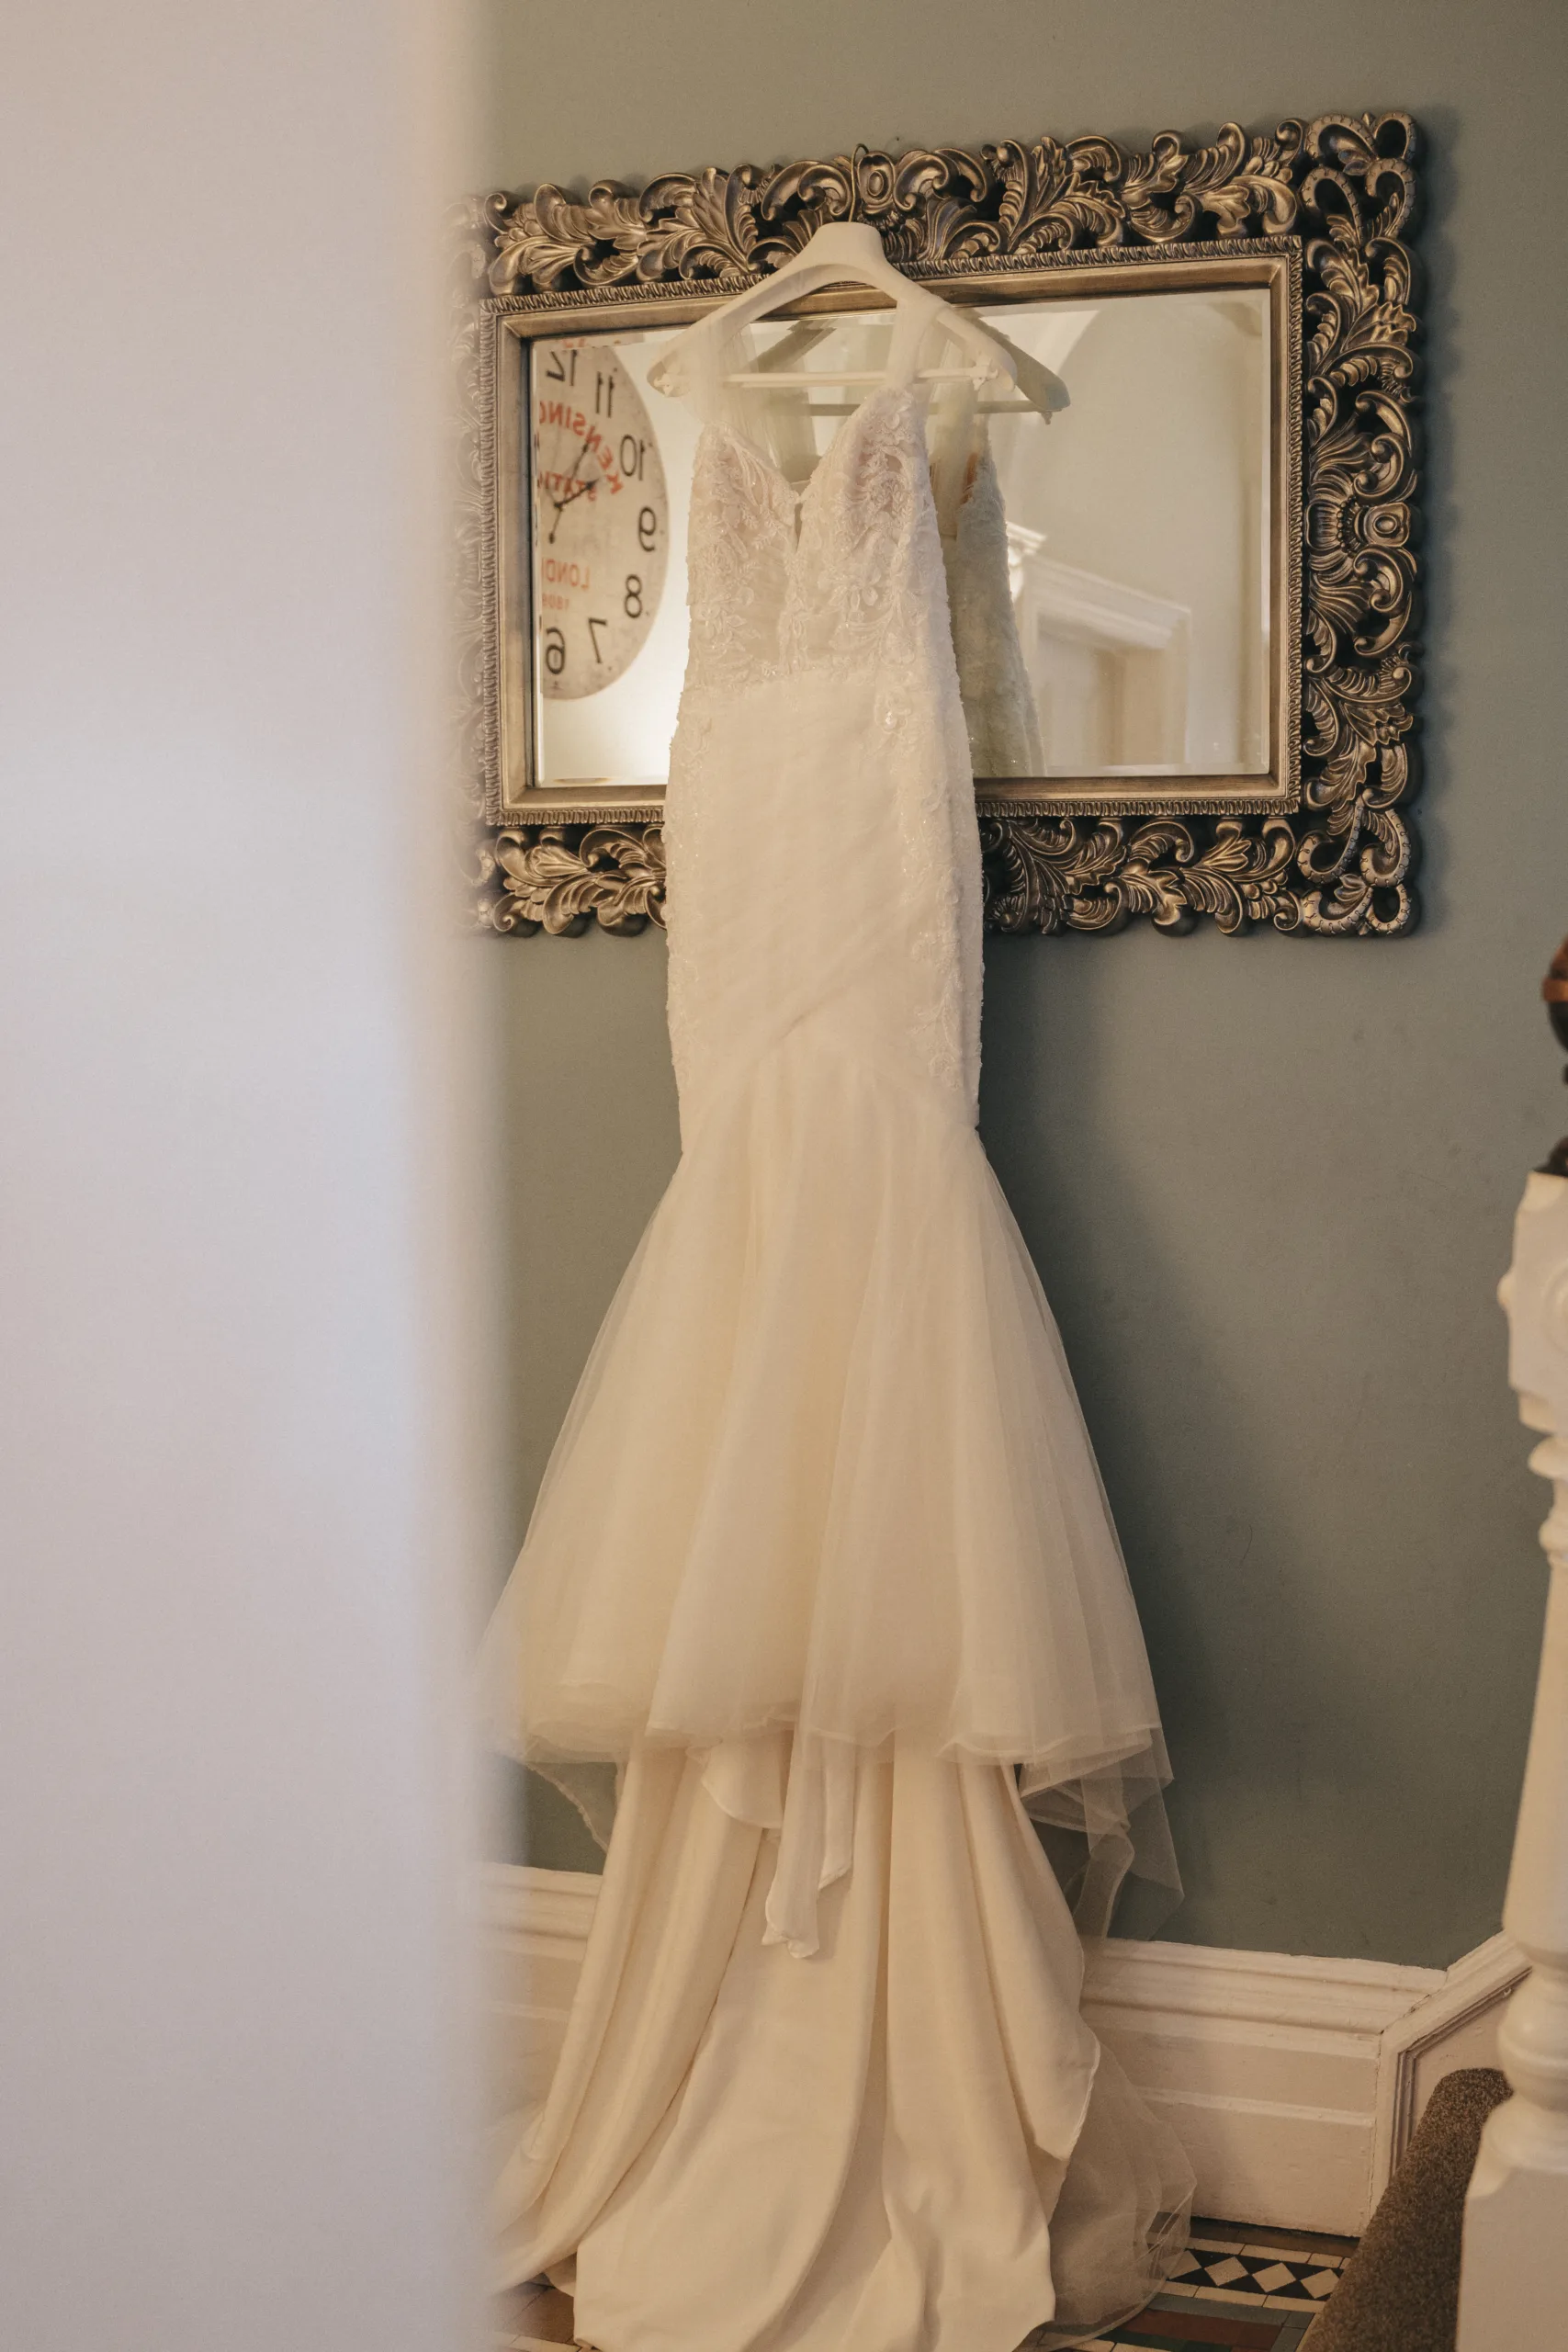 A wedding dress hanging in front of a mirror, captured by a Lincolnshire photographer.